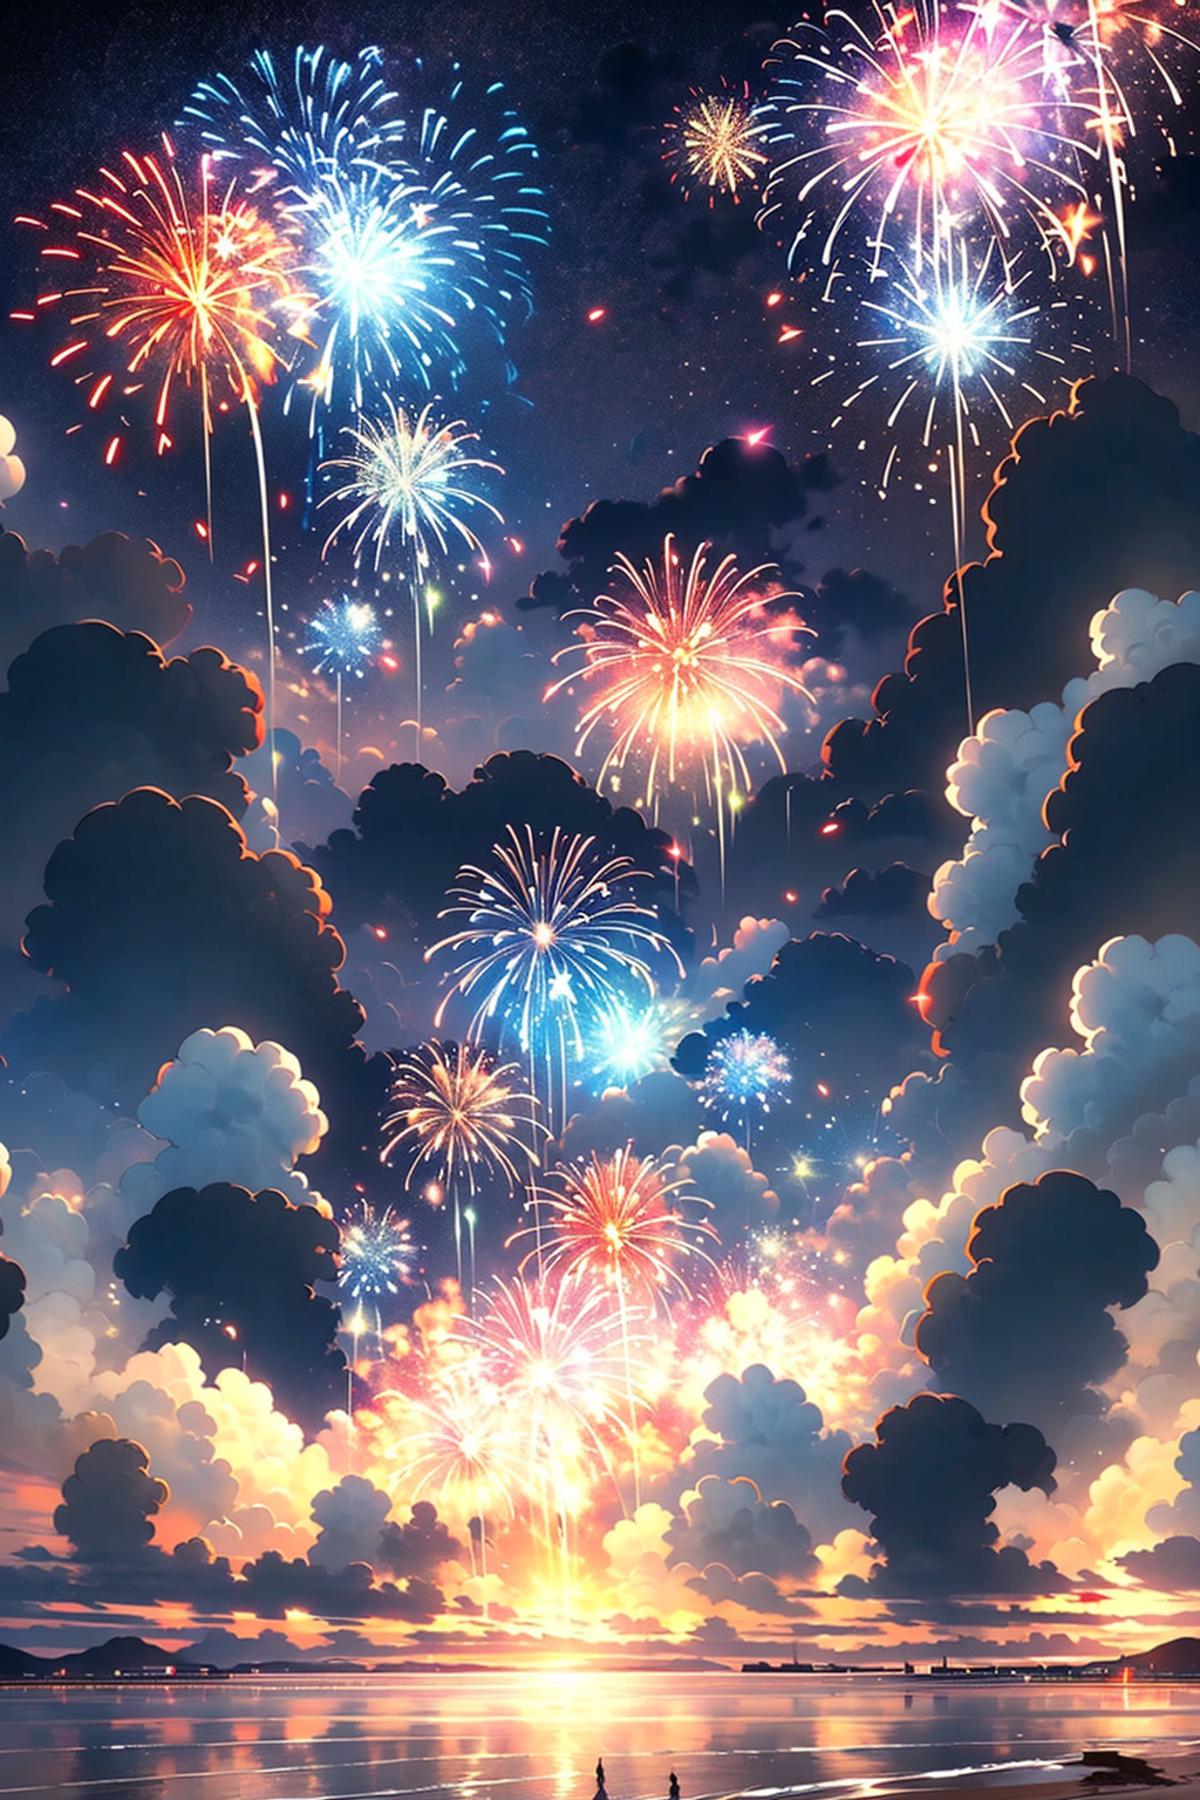 fireworks image by nnna